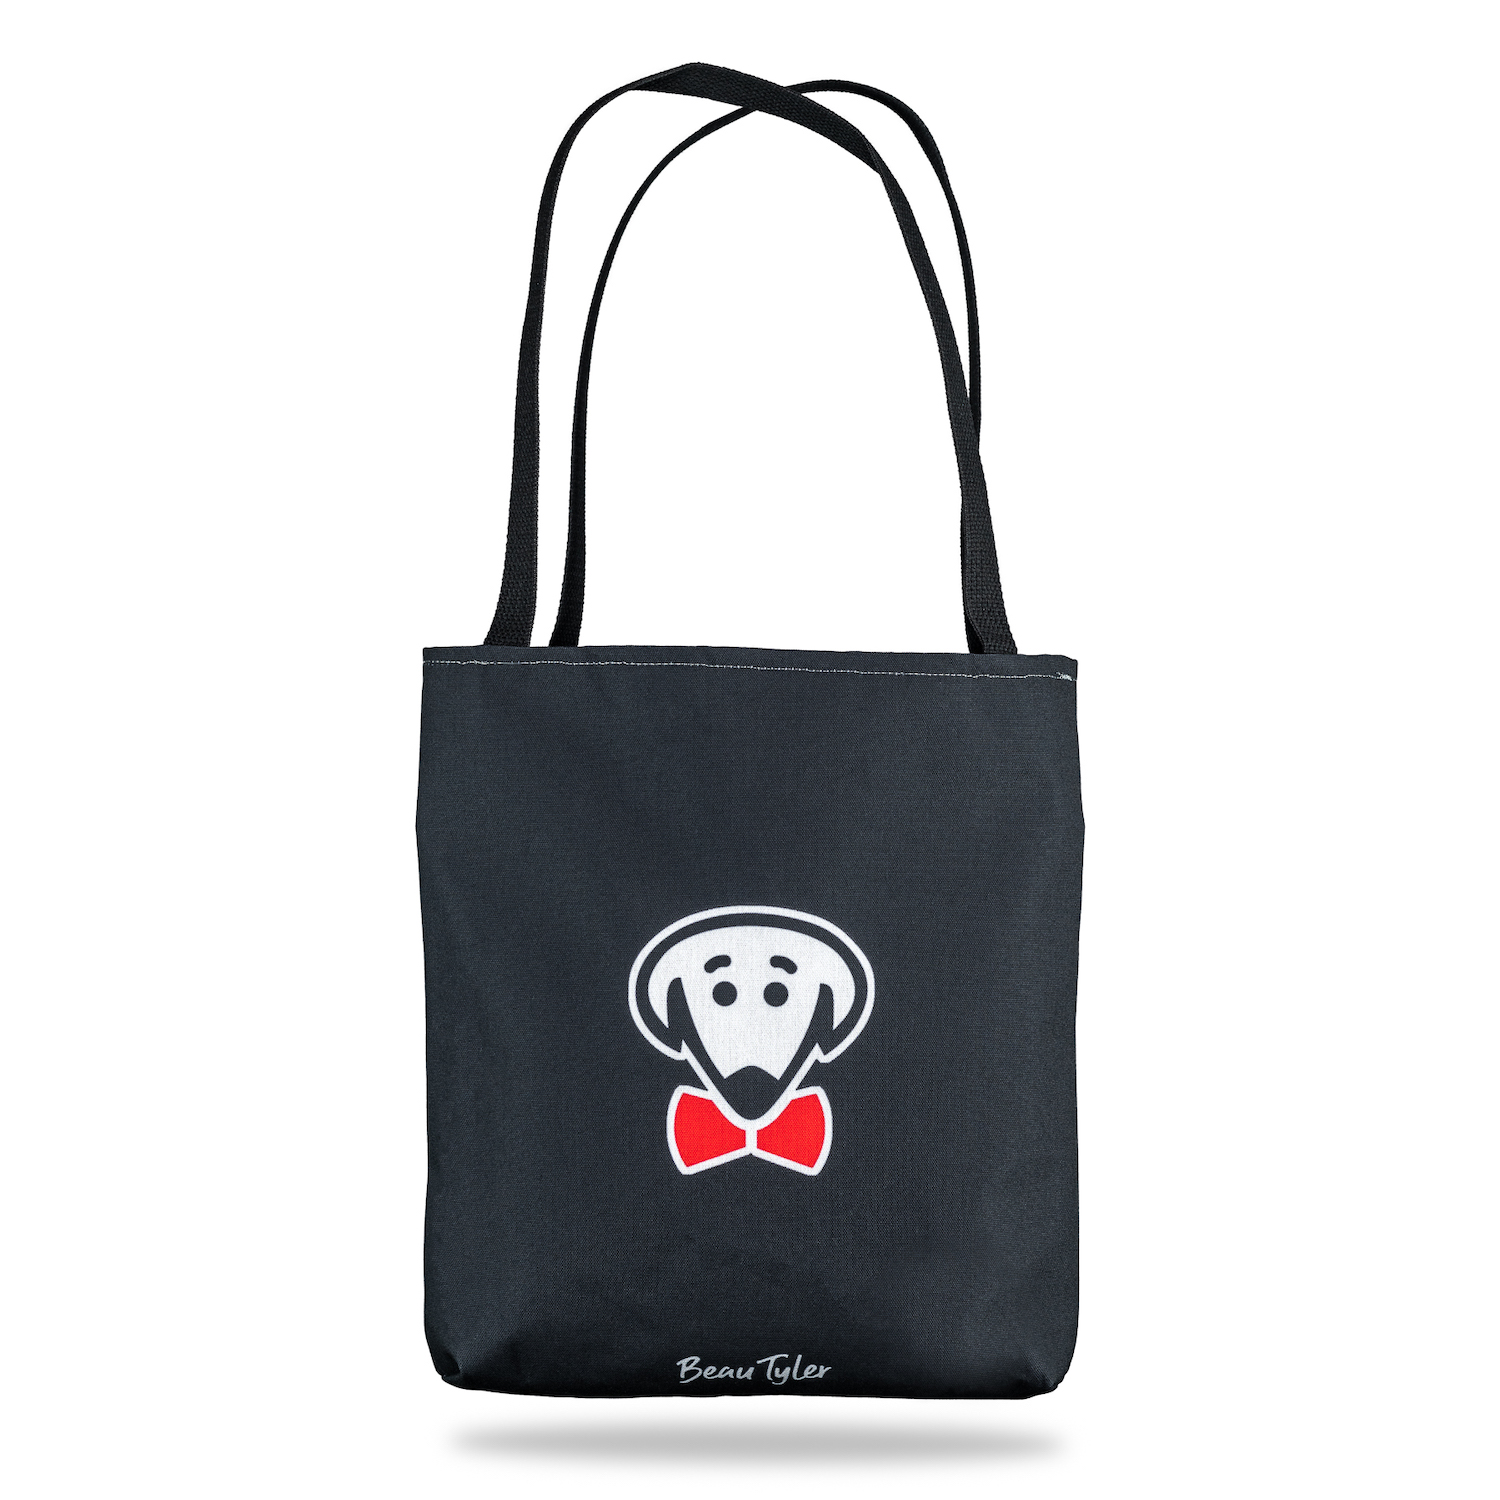 Beau Tyler - If I Could Fit My Dog In Here I Would! black tote bag back